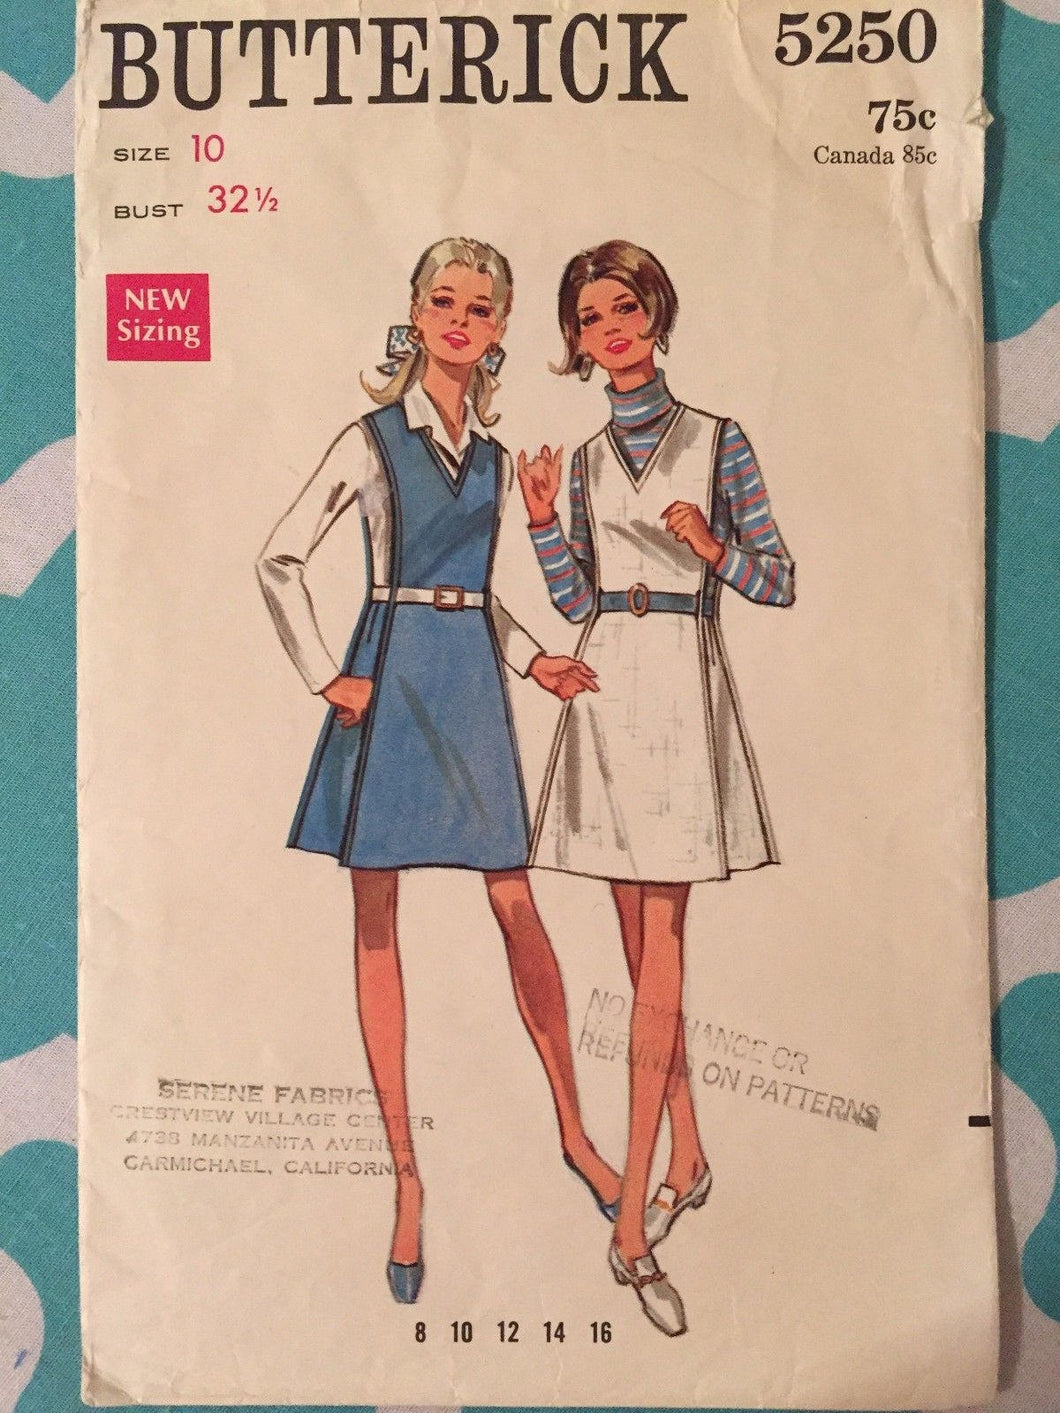 Vintage 1970's Butterick #5250 Sewing Pattern Size 10, Bust 32.5